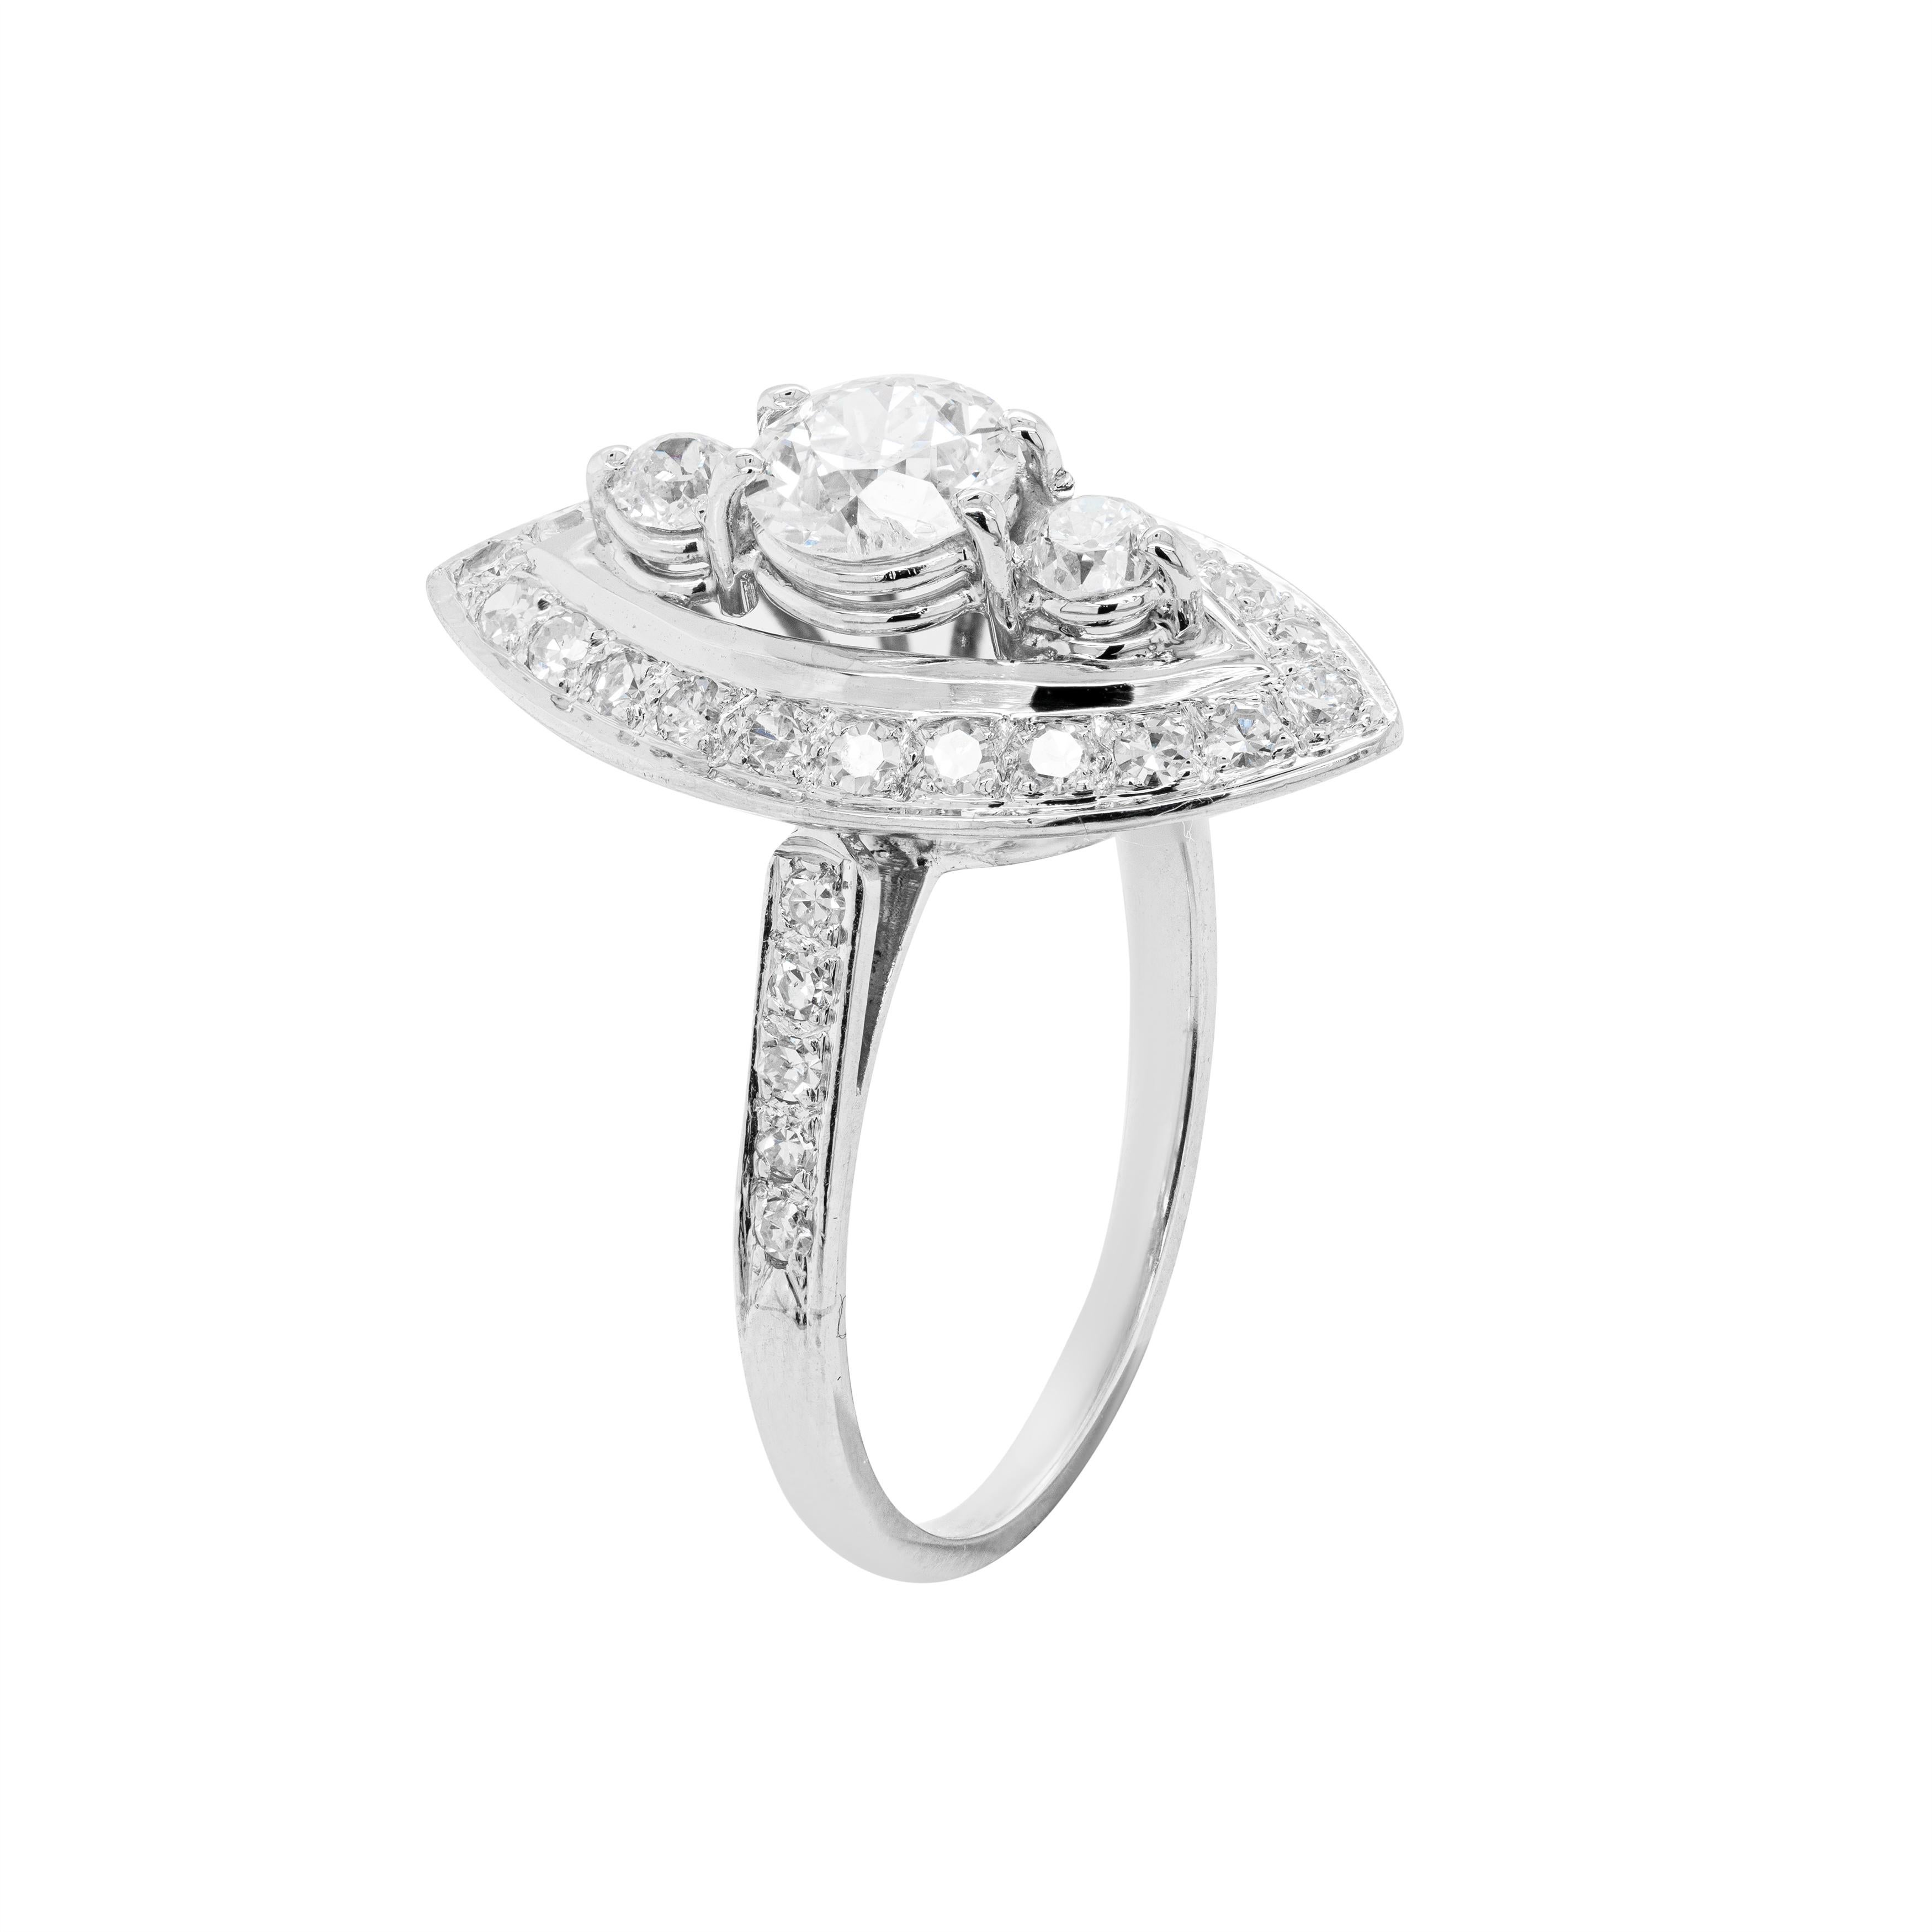 Marquise shaped dress ring featuring an old cut diamond weighing 0.87ct in the centre with two old cut diamonds vertically on either side with a combined weight of 0.30ct in open back claw settings.
The ring's border is grain set with 22 eight cut